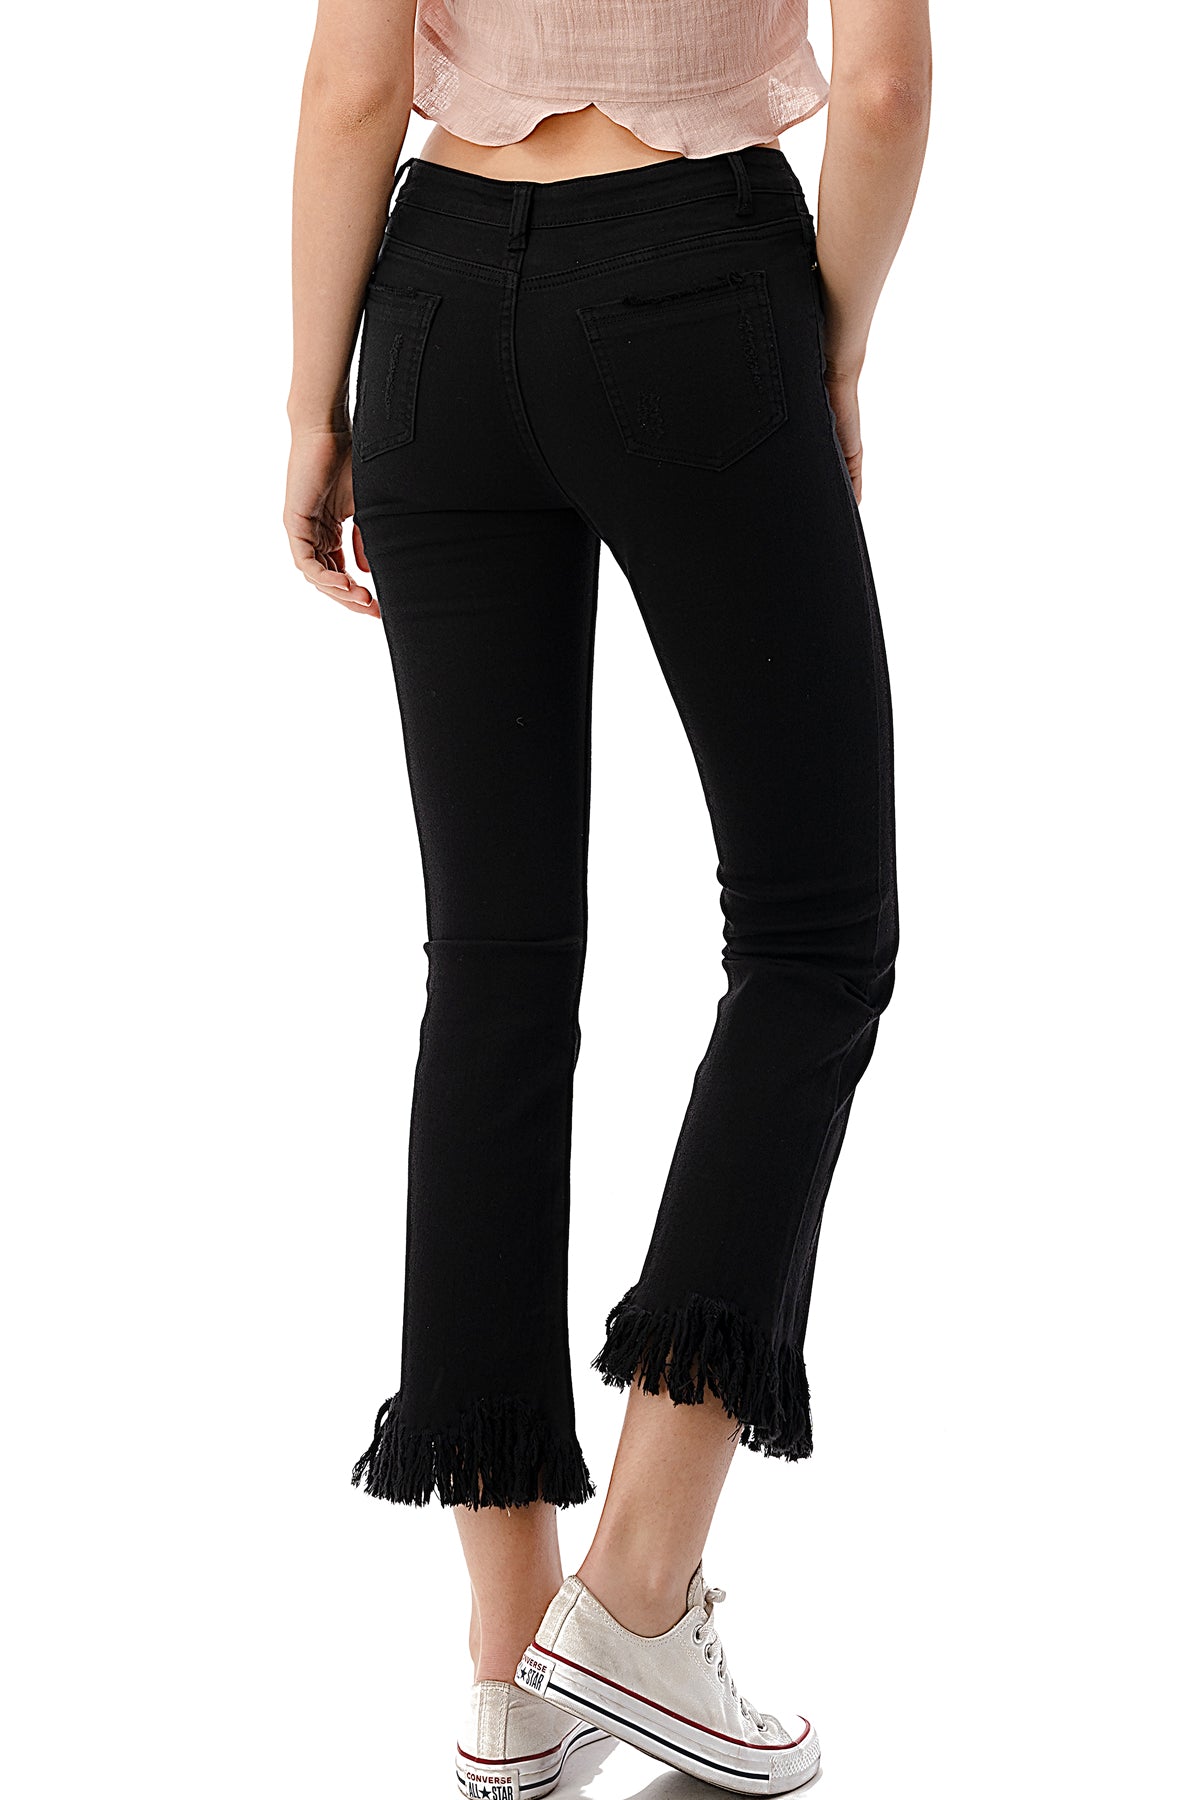 EDGY Land Girl's and Women's Fringed Leg Edge Skinny Fit CroPPEd & Ankle Fashion and Trendy CroPPEd Jean Pant